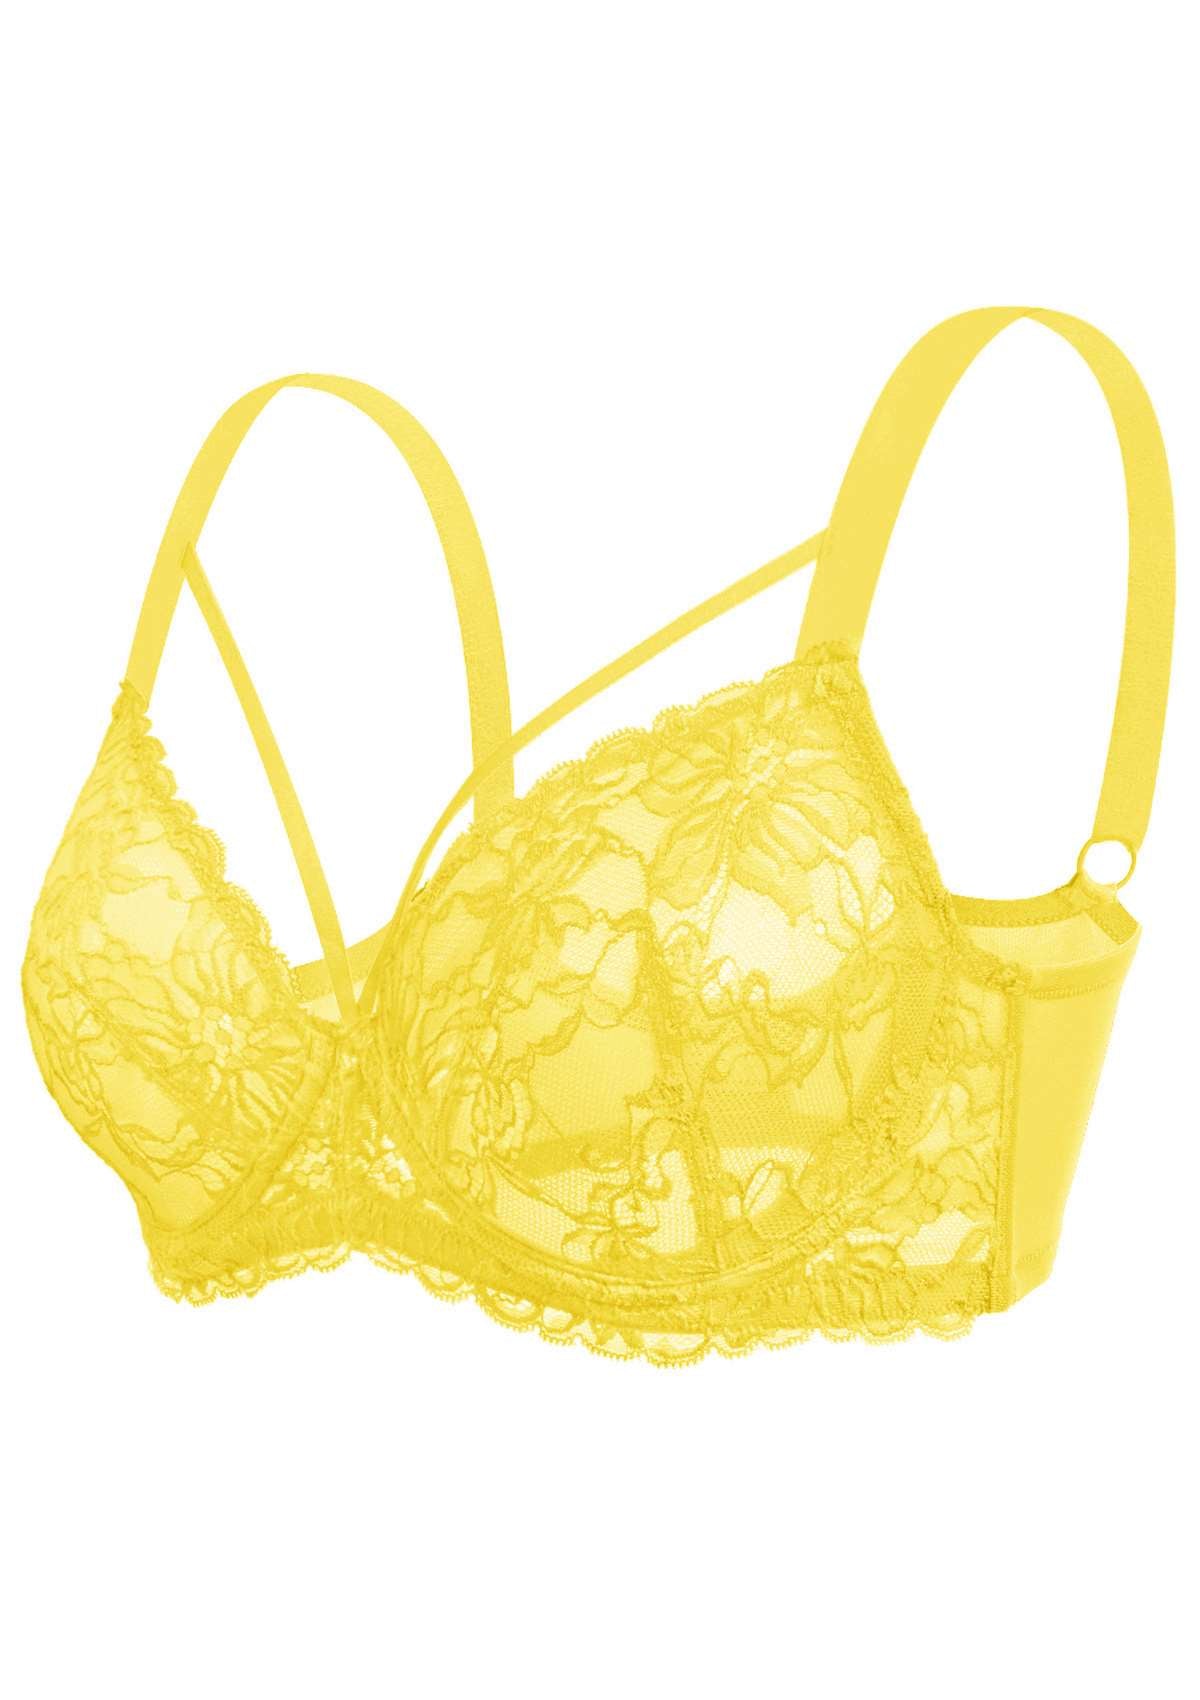 HSIA Unlined Lace Mesh Minimizer Bra For Large Breasts, Full Coverage - Bright Green / 34 / DDD/F